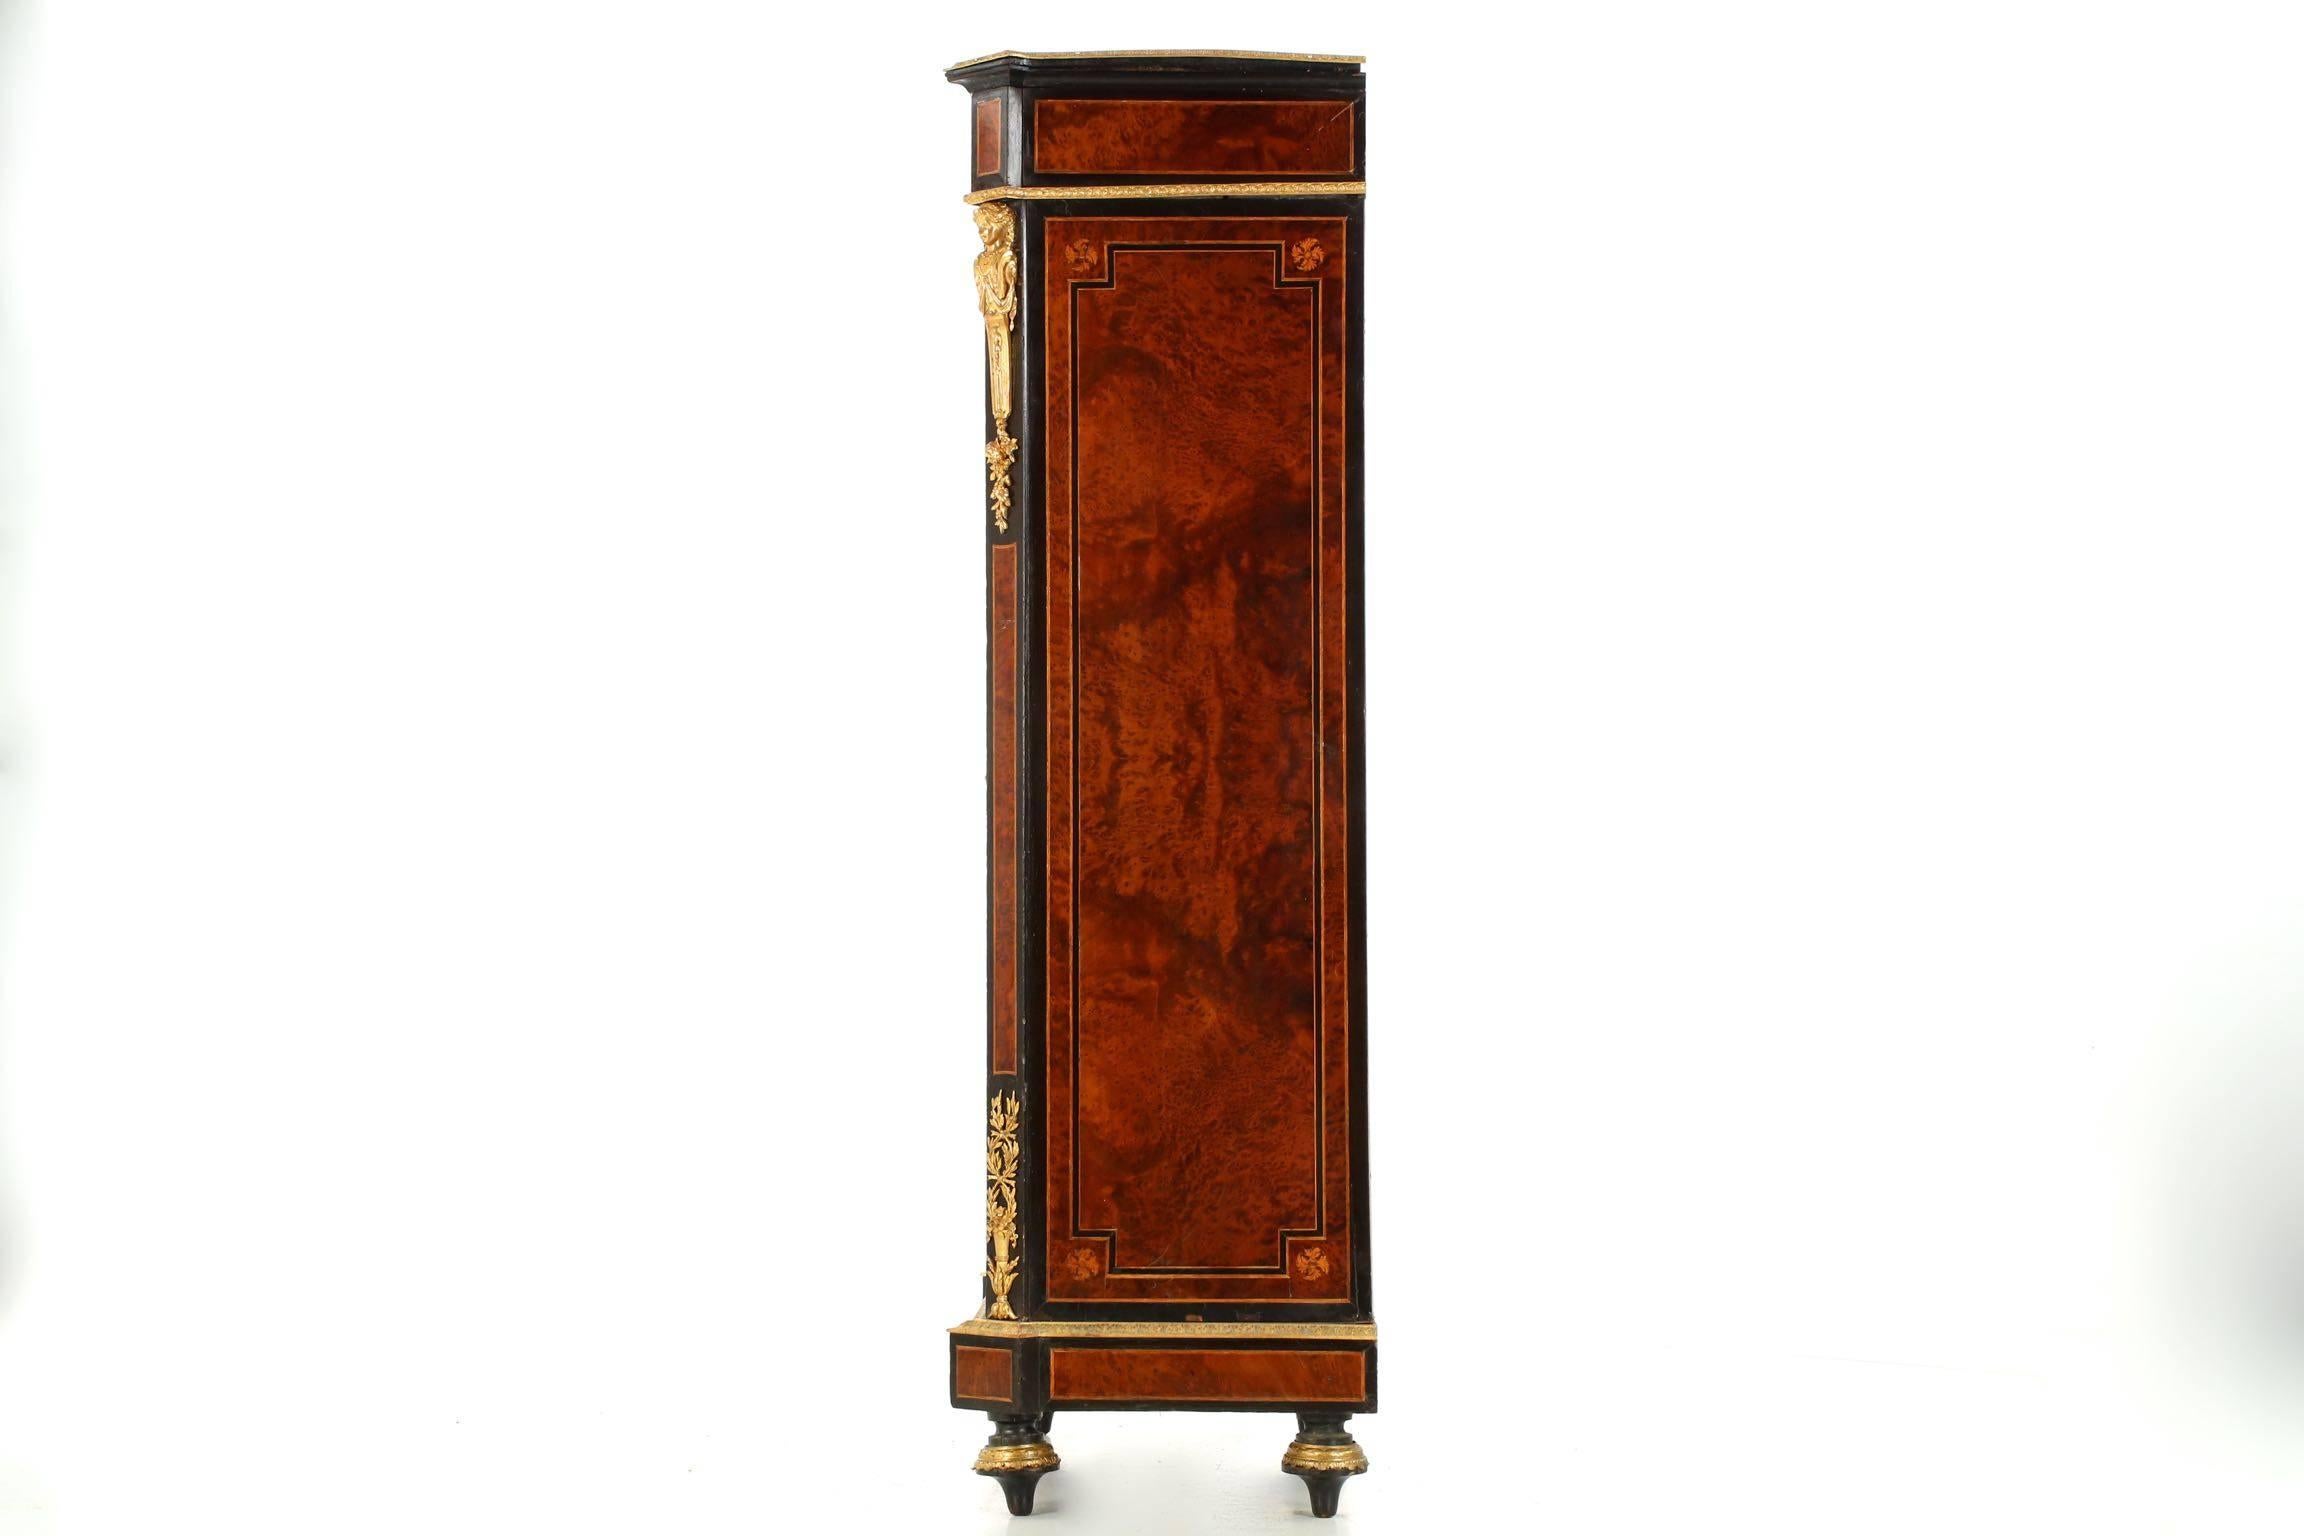 Beveled French Napoleon III Marquetry Inlaid Antique Bibliotheque Bookcase Cabinet